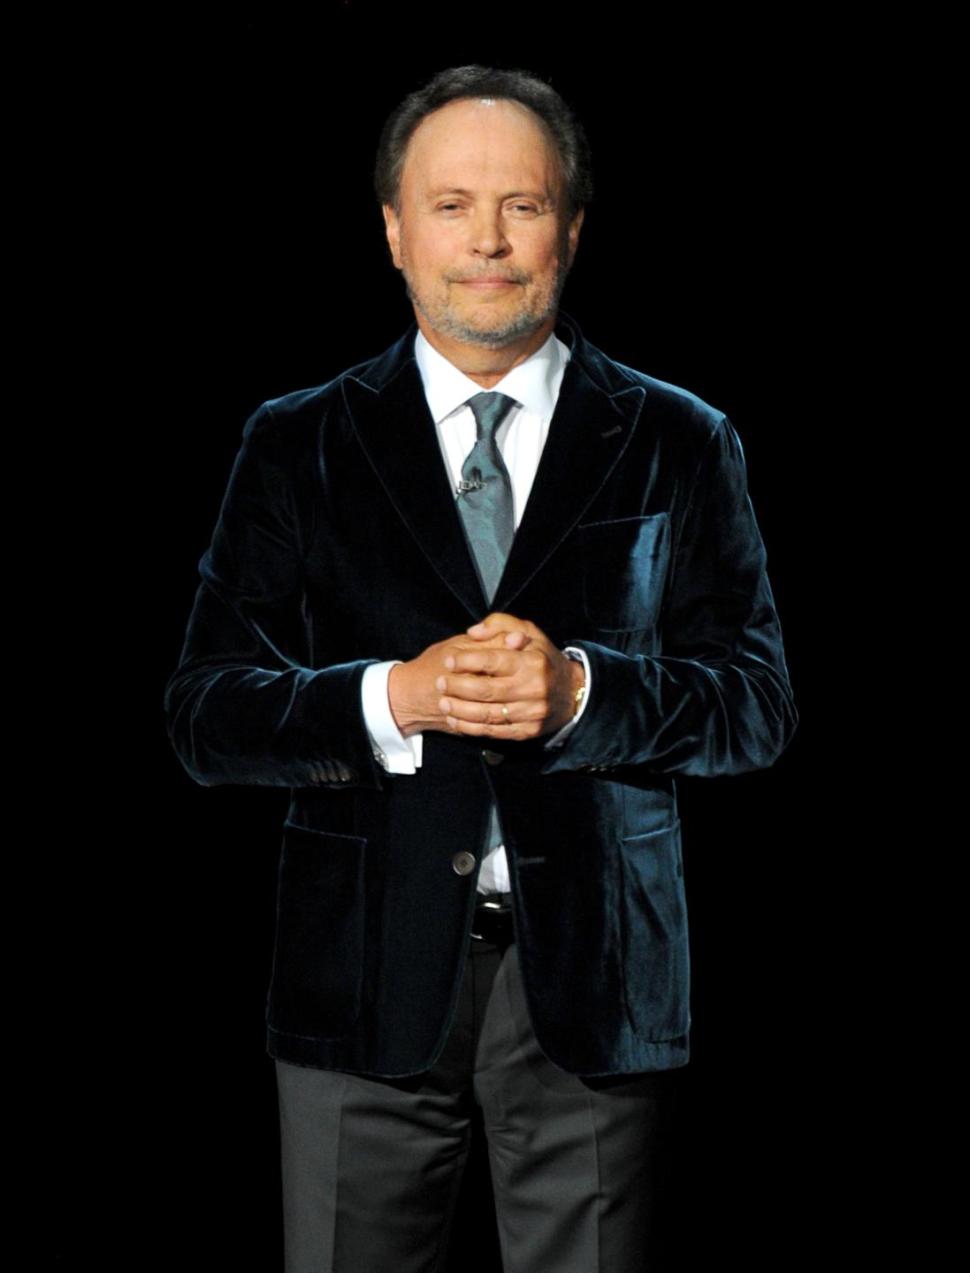 Actor Billy Crystal (pictured), Bonnie Hunt and Whoopi Goldberg spoke during the service.